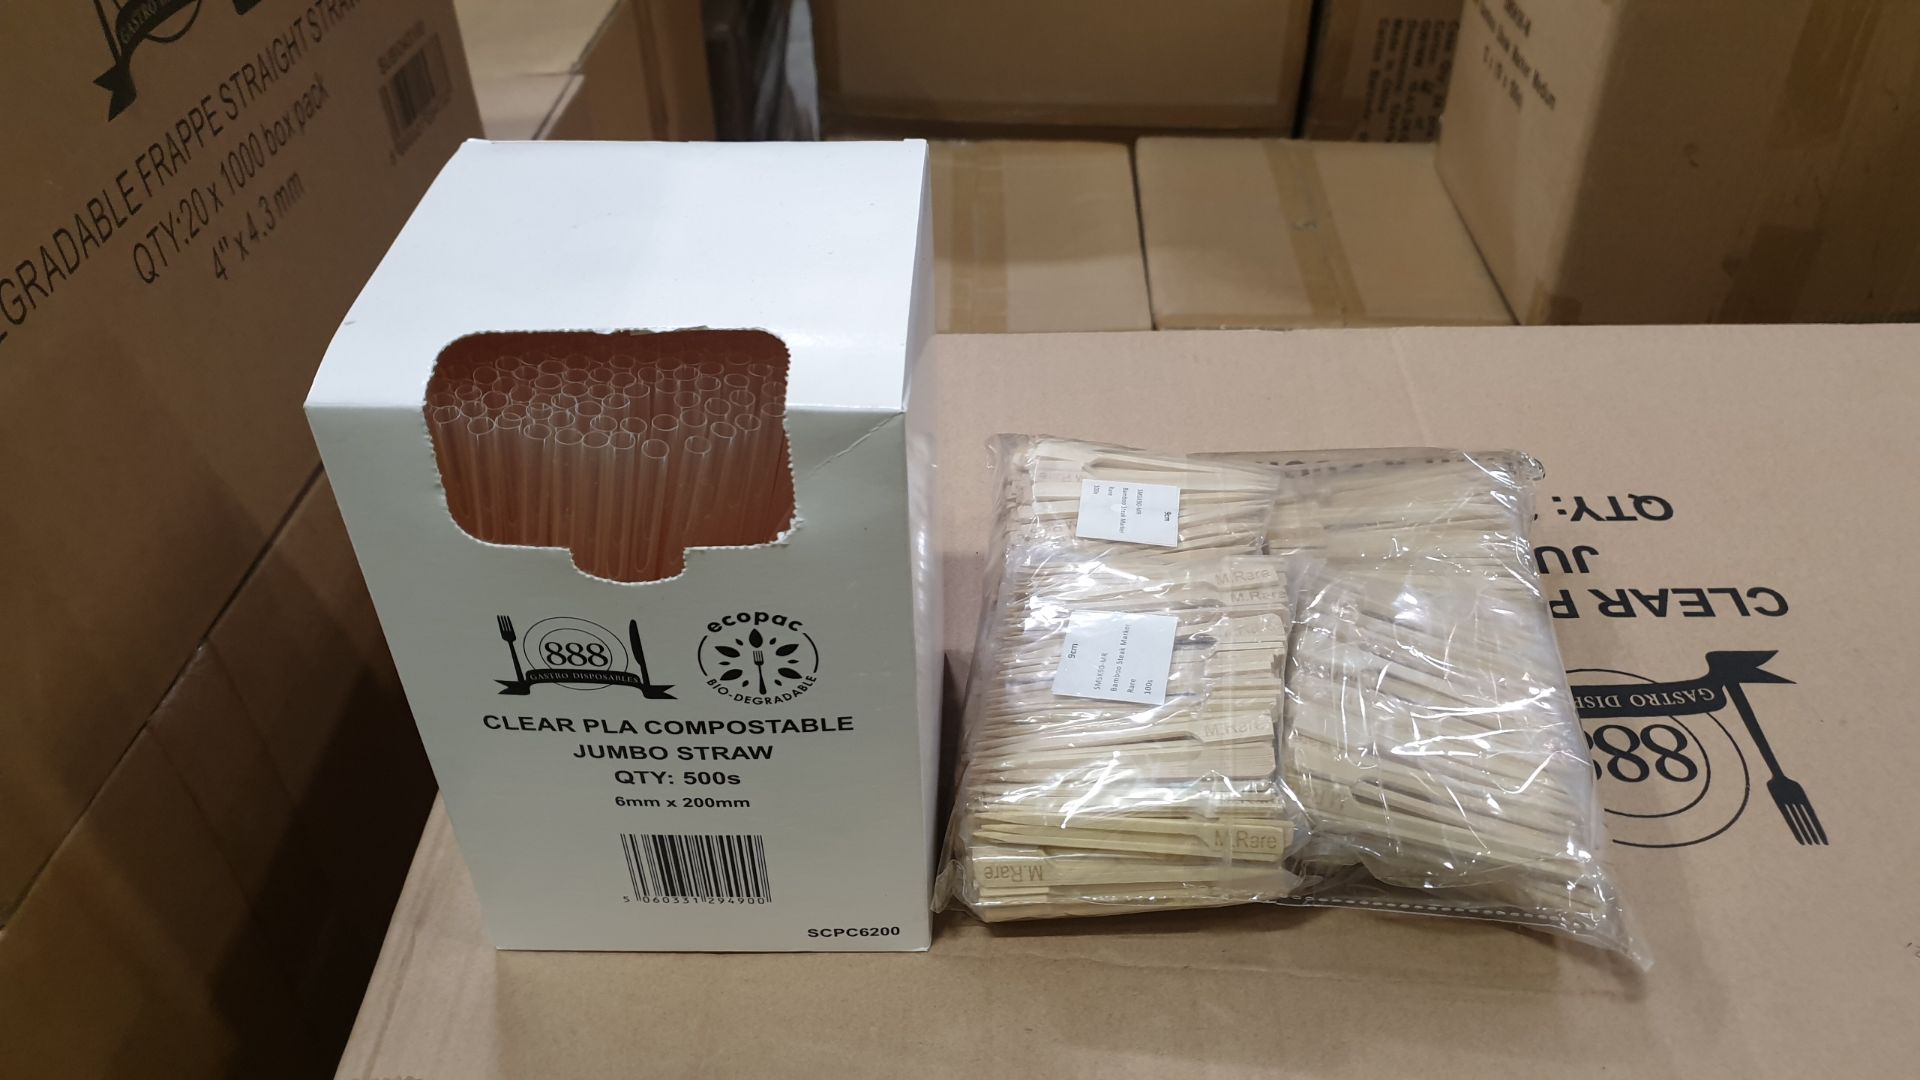 160,000 PCS OF CATERING SUPPLIES IE. 40,000 CLEAR PLA COMPOSTABLE JUMBO STRAWS AND 120,000 9CM